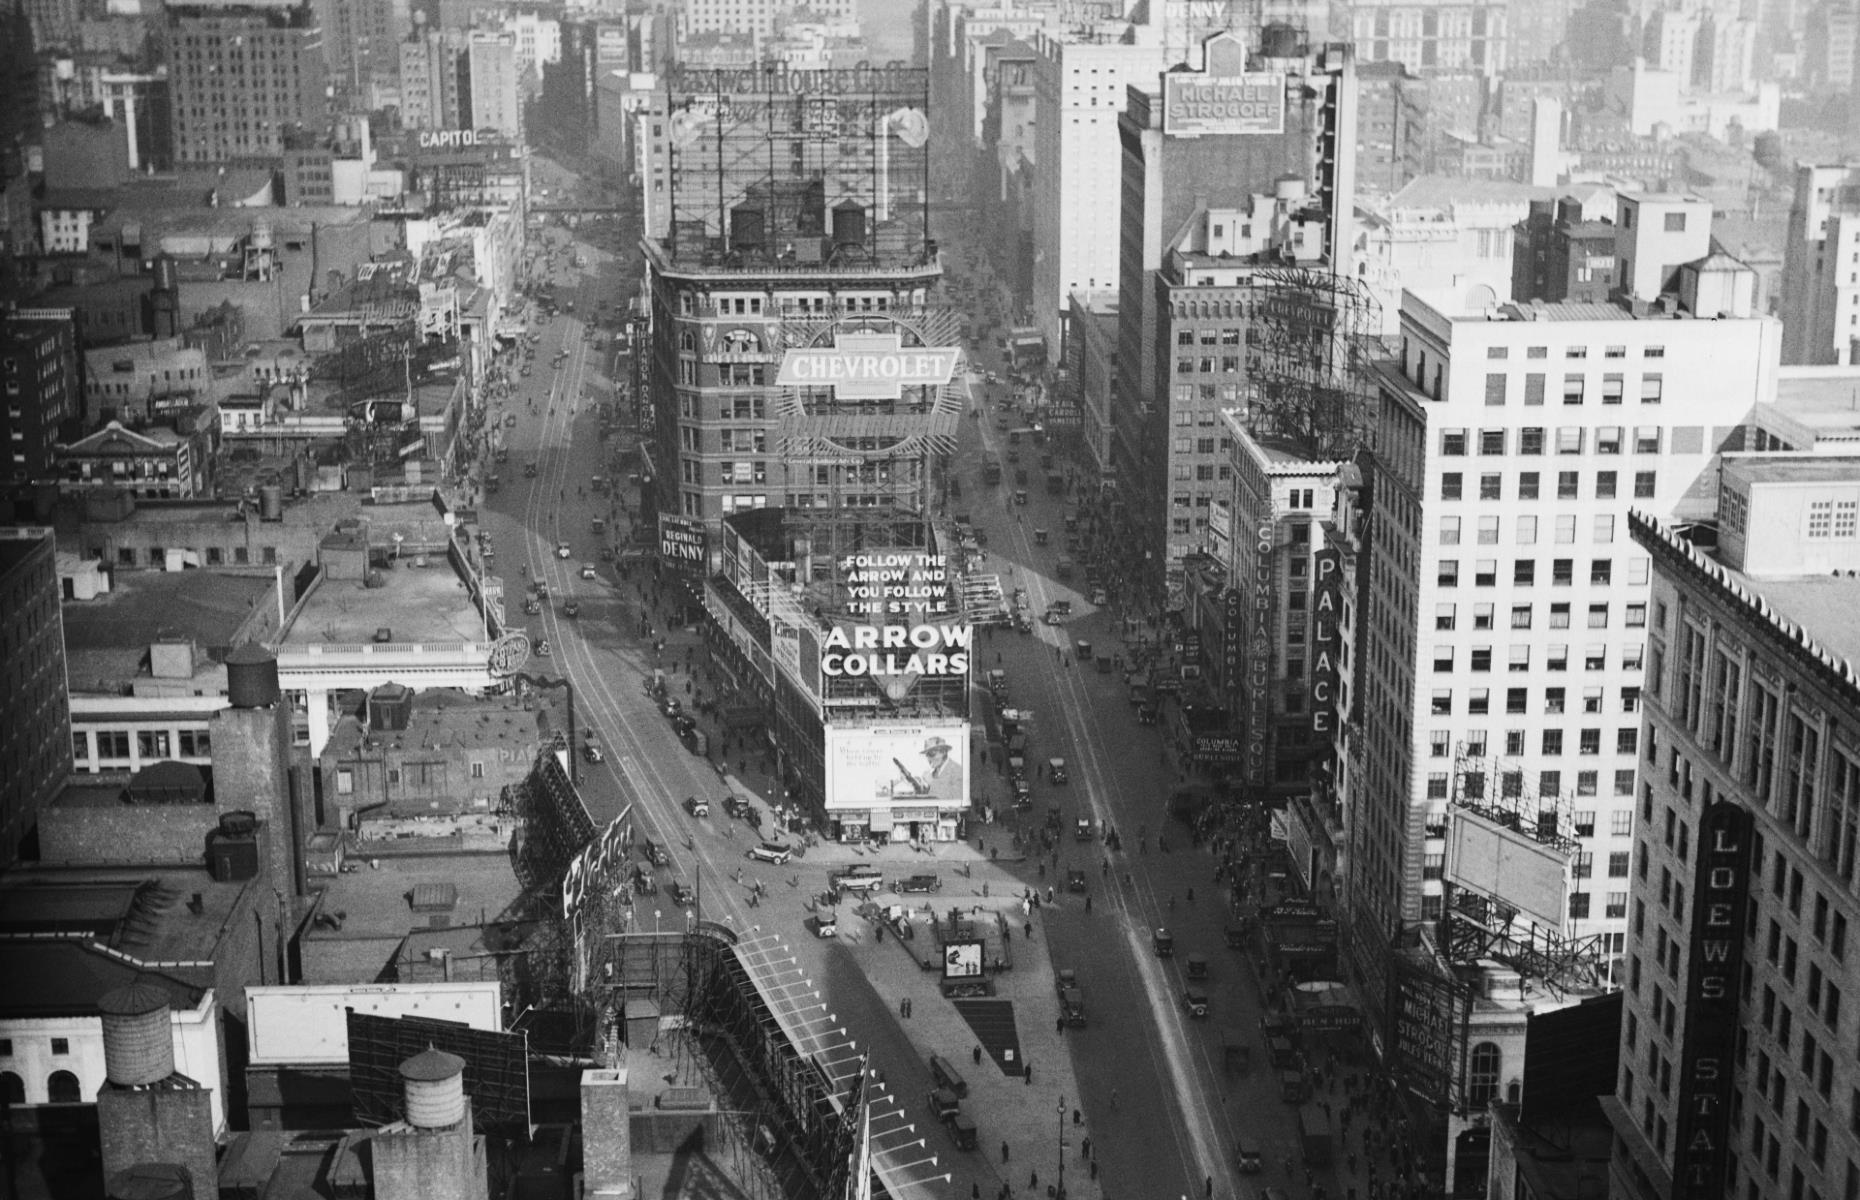 <p>The Times Square of the 1920s (pictured here) is a far cry from the flashing lights and billboards of the Times Square we know today. Originally known as Longacre Square, in the 1880s it comprised a large open space surrounded by apartments, but shortly after that electricity arrived in the area, and streetlights and theatre signs sprung up. It was renamed to Times Square in April 1904, after the <em>New York Times</em>, which was set to relocate its headquarters there in January 1905.</p>